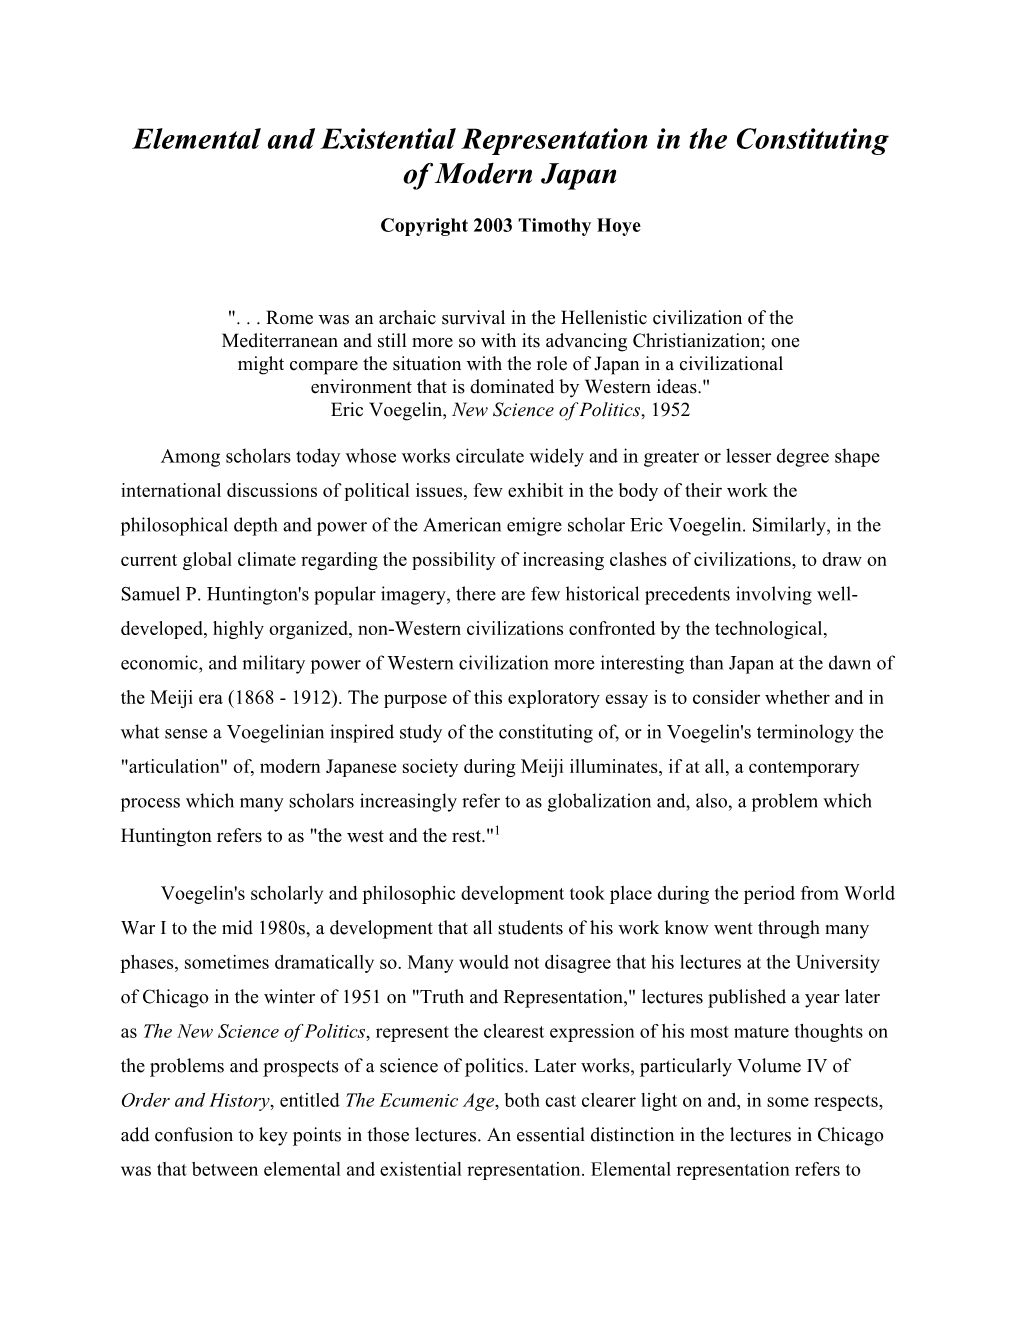 Elemental and Existential Representation in the Constituting of Modern Japan